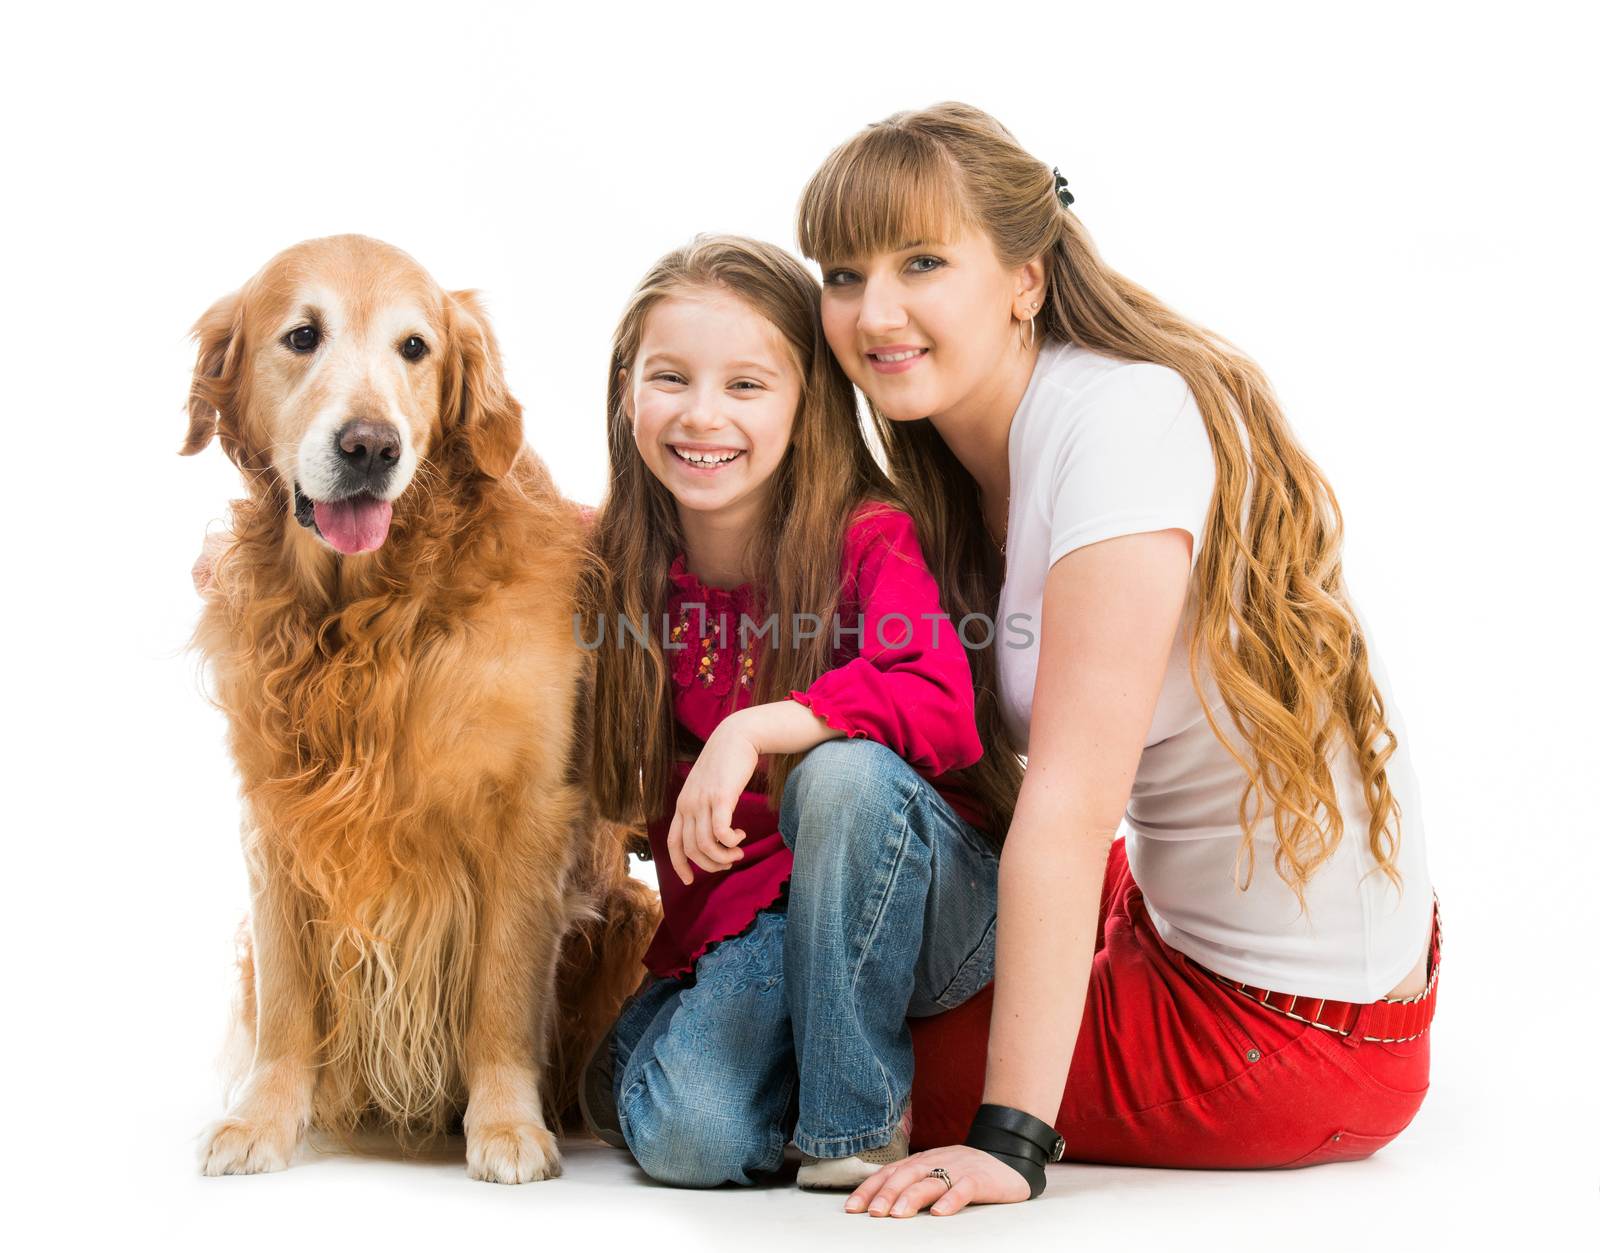 smiling woman and little girl with a red retriever on white background